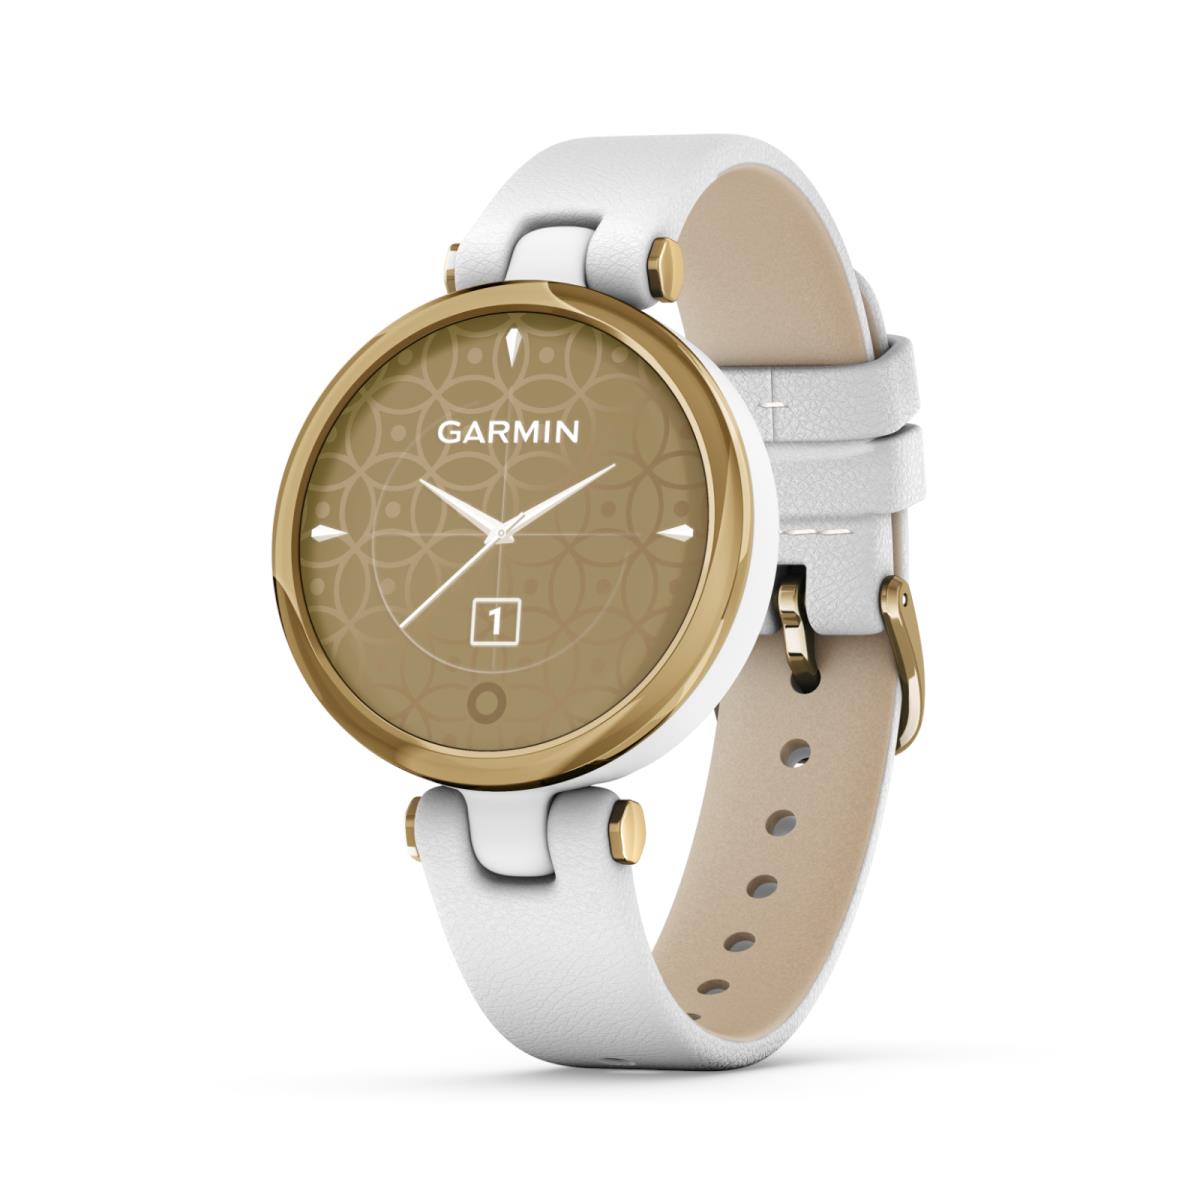 Garmin Lily Women s Classic Fitness Smartwatch Light Gold w/ White Leather Band - Light Gold Bezel with White Band, Band: White